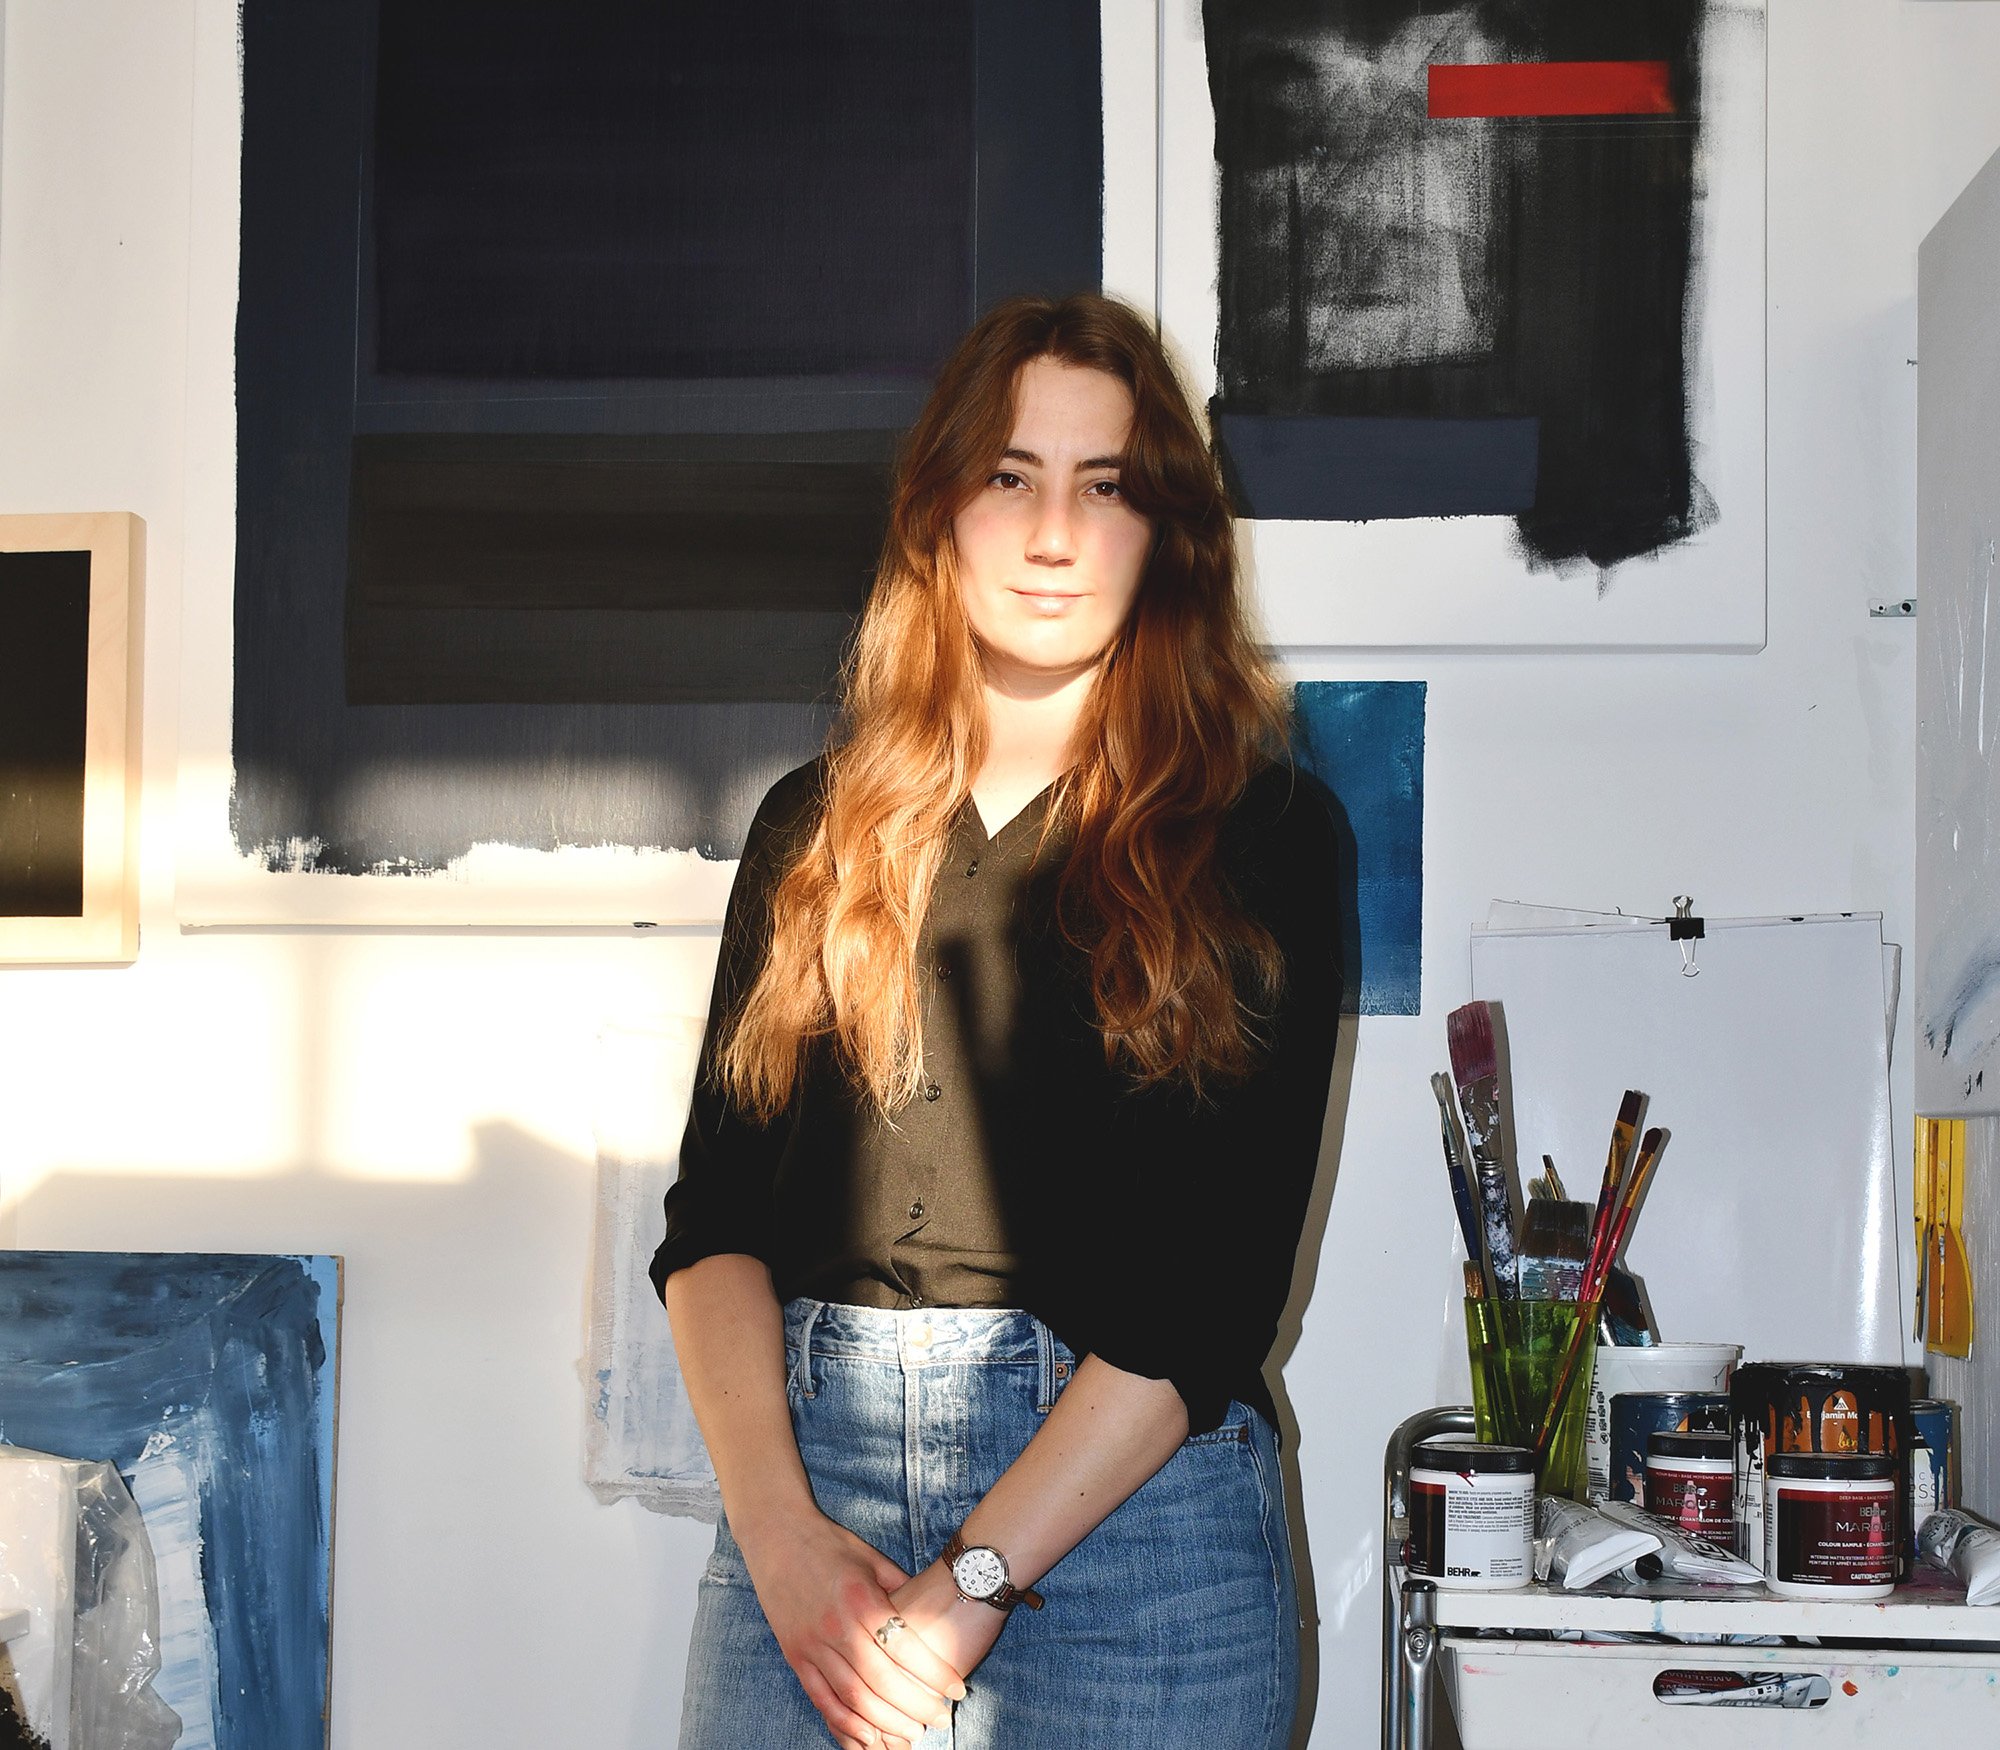   Mel Hayes is standing in her studio, she is wearing blue jeans, a black shirt, and has long brown hair. Behind her are paintings, mounted to the walls. To her left is a table filled with paints and brushes.&nbsp;  